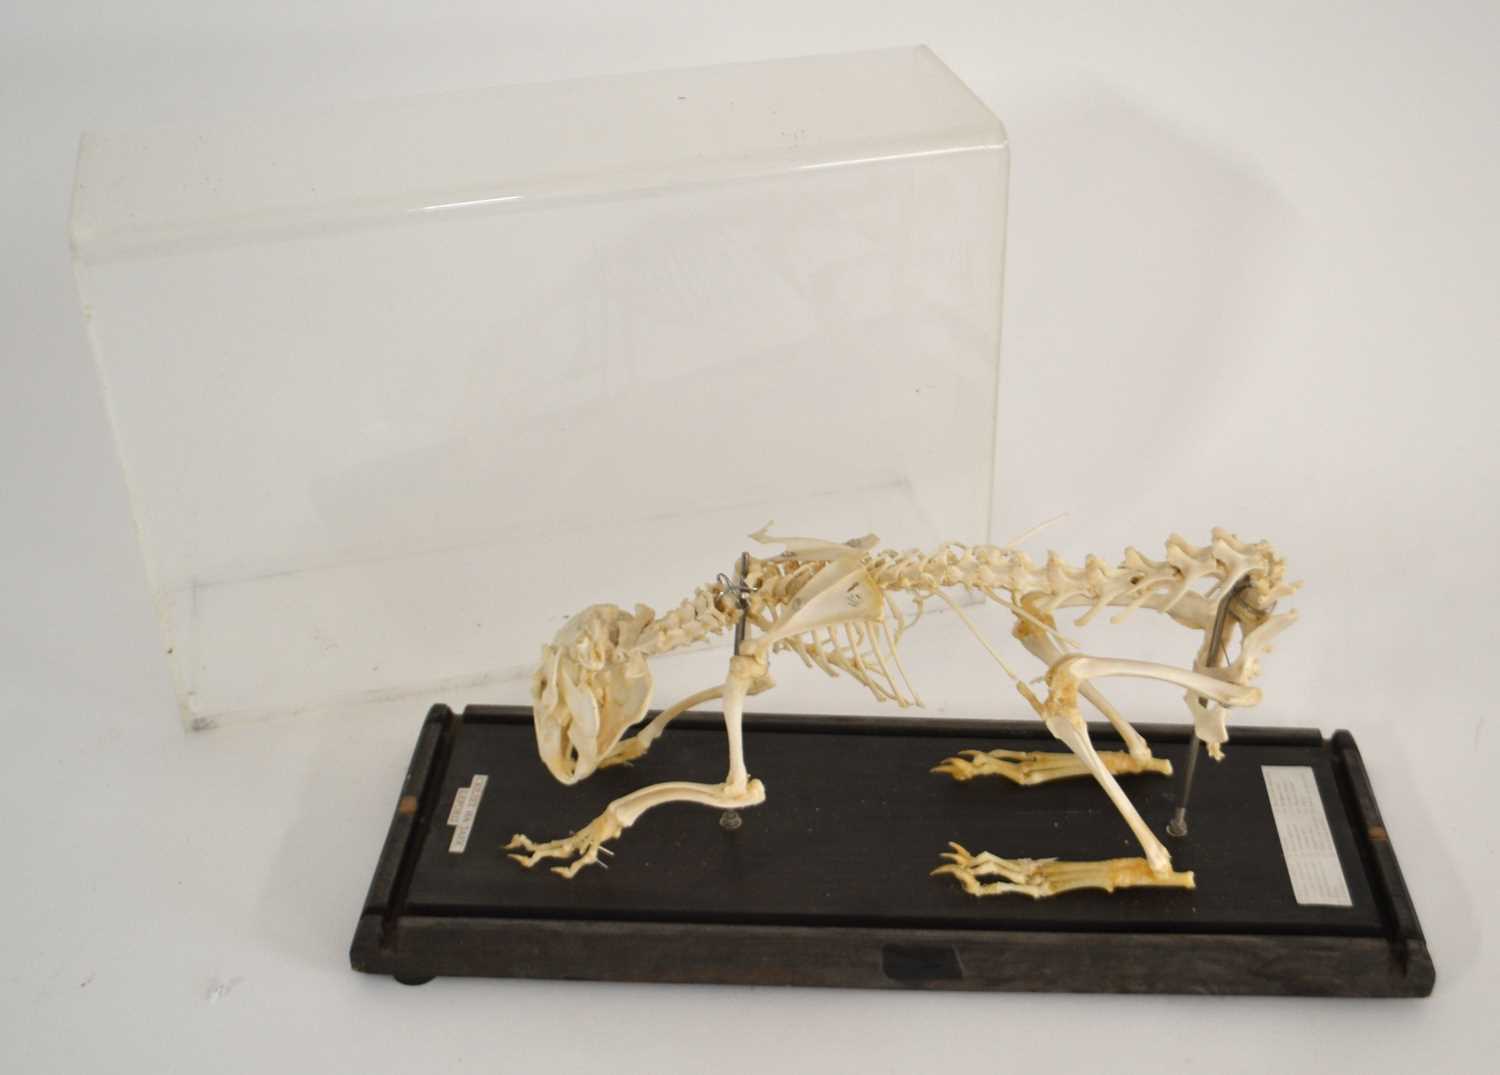 20th Century taxidermy skeleton of a Hare (Lepus Europaeus) on wooden base and under perspex - Image 2 of 4